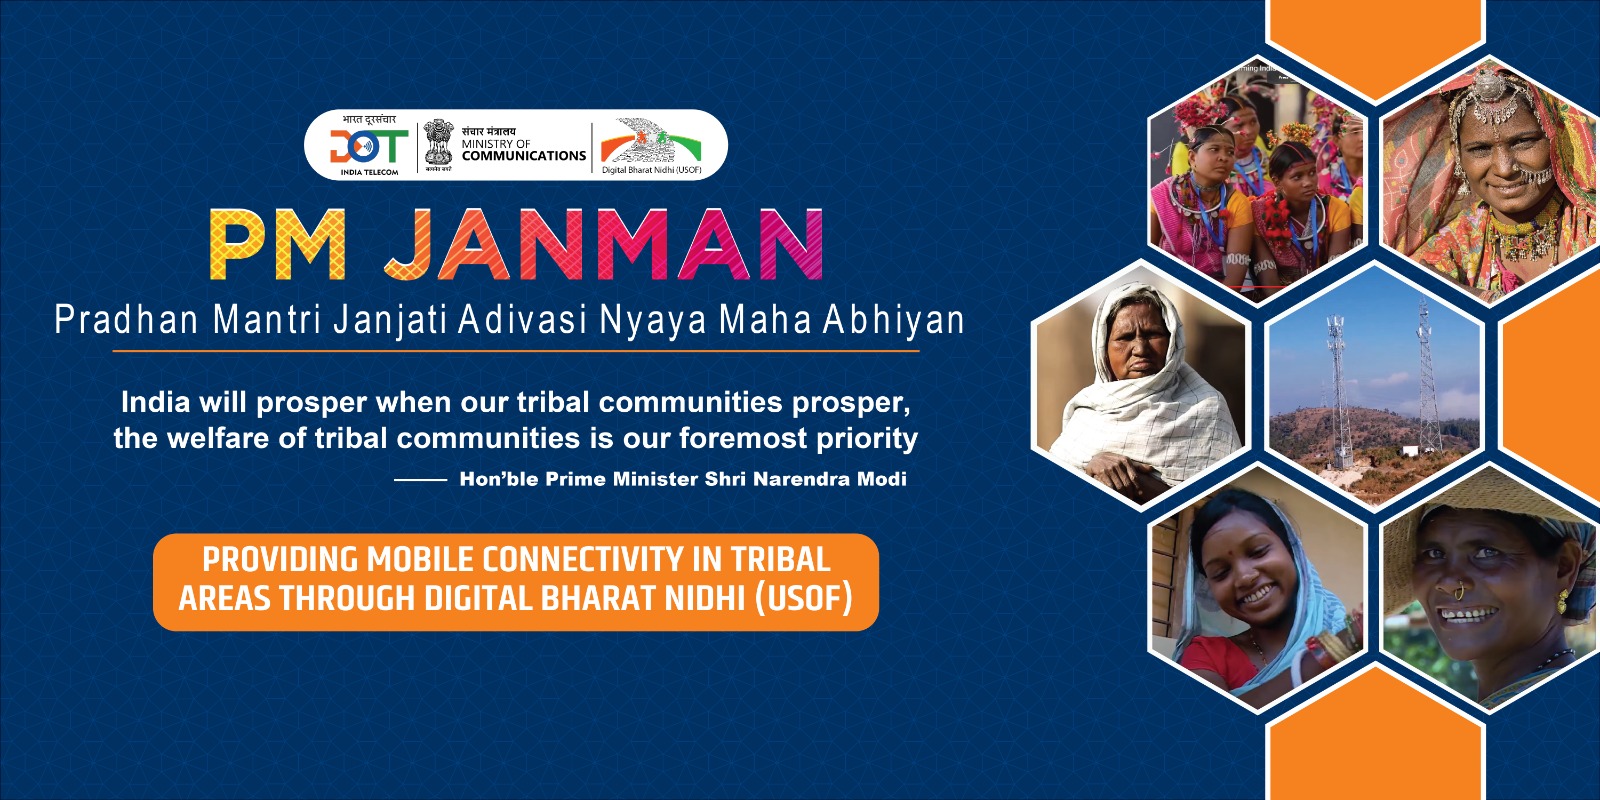 Digital Bharat Nidhi (USOF) is committed towards propelling the PM JANMAN movement ahead